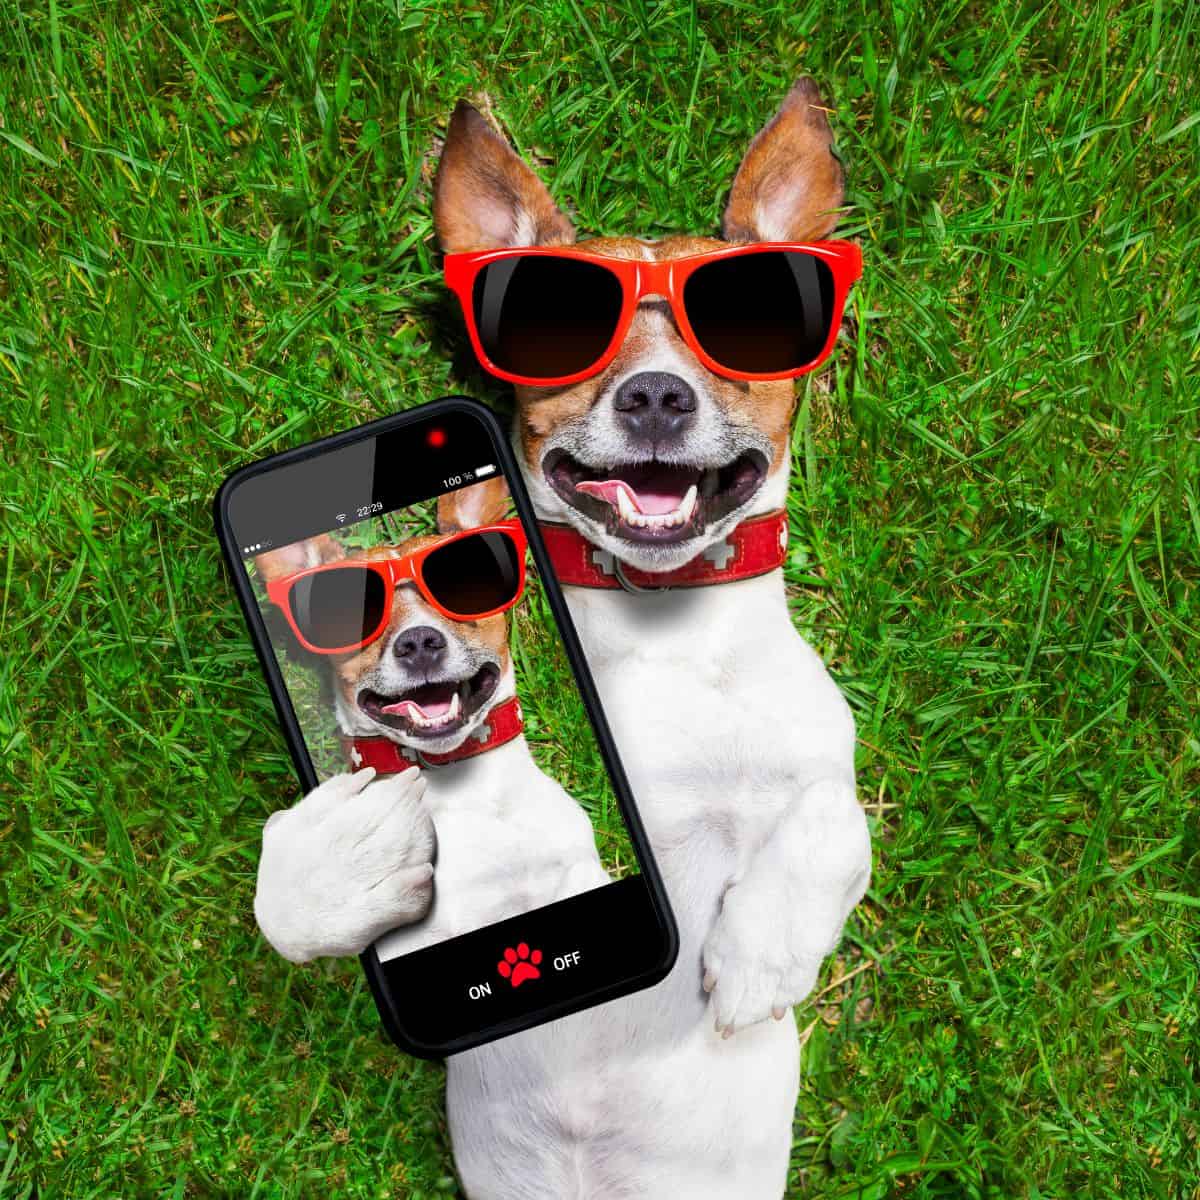 Small brown and white jack Russell terrier in red sunglasses holding a phone taking a selfie for Instagram.